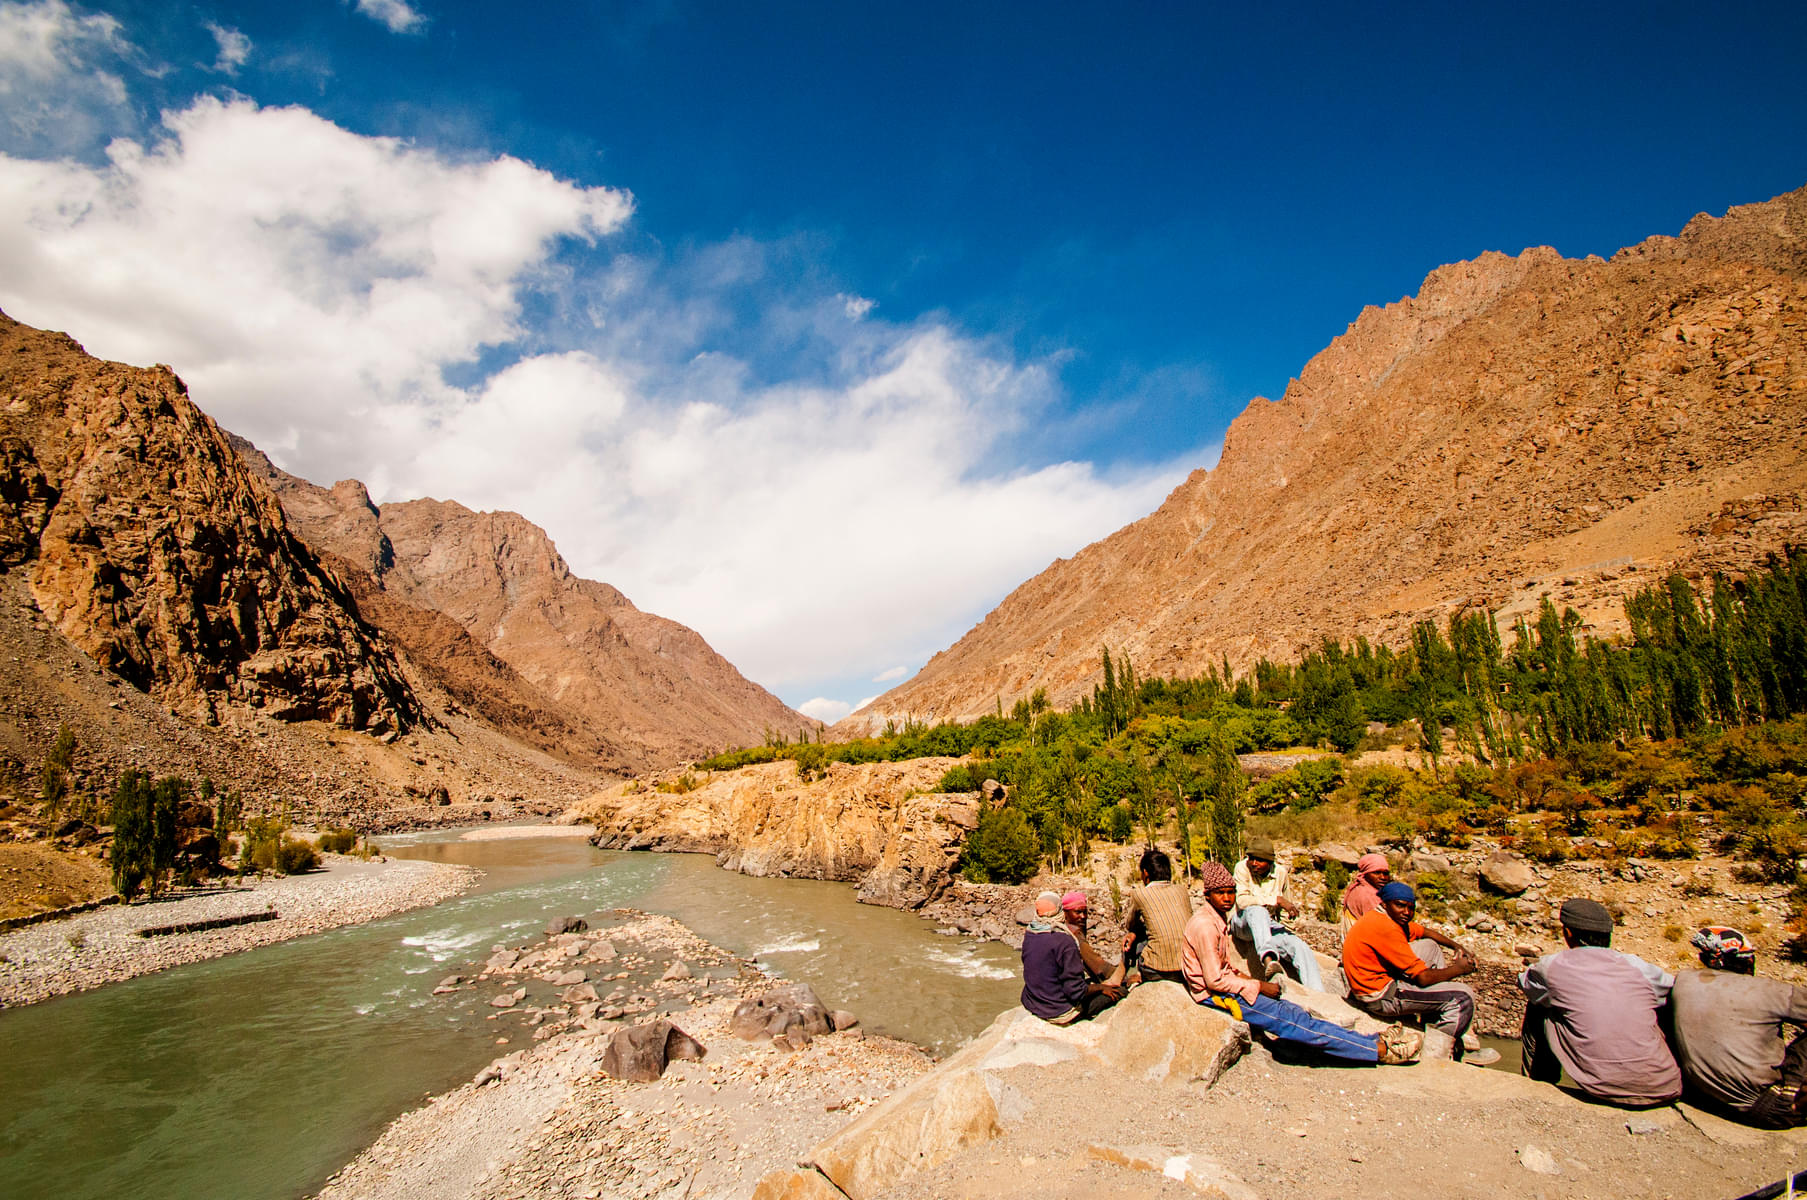 Drive along the rivers of Ladakh to discover the majestic region's hidden treasures.